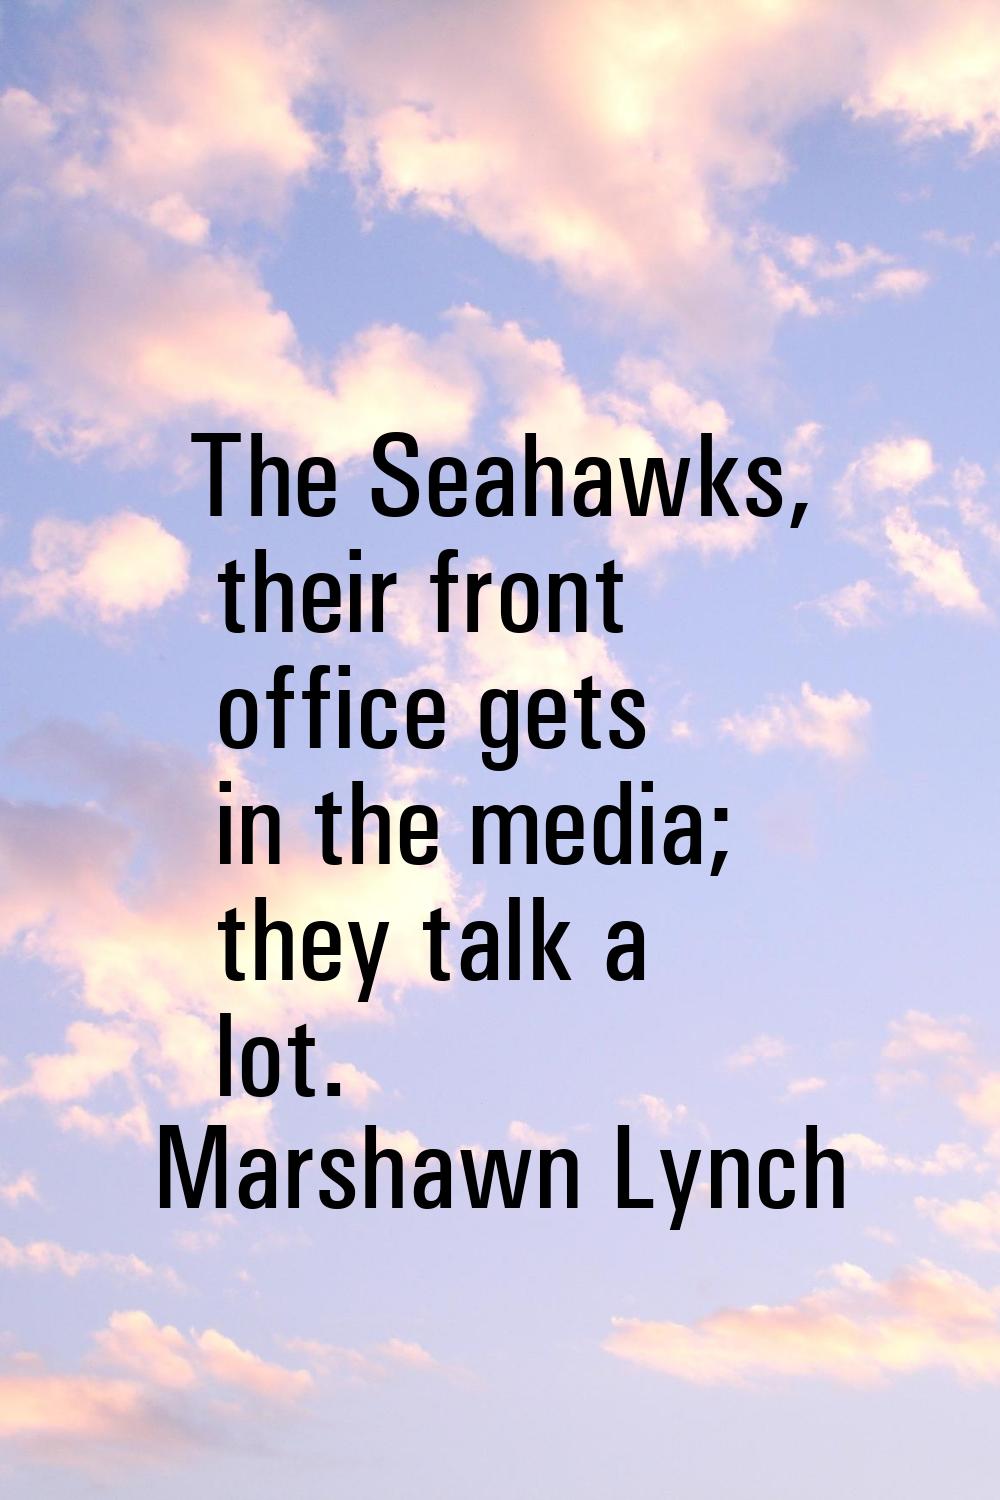 The Seahawks, their front office gets in the media; they talk a lot.